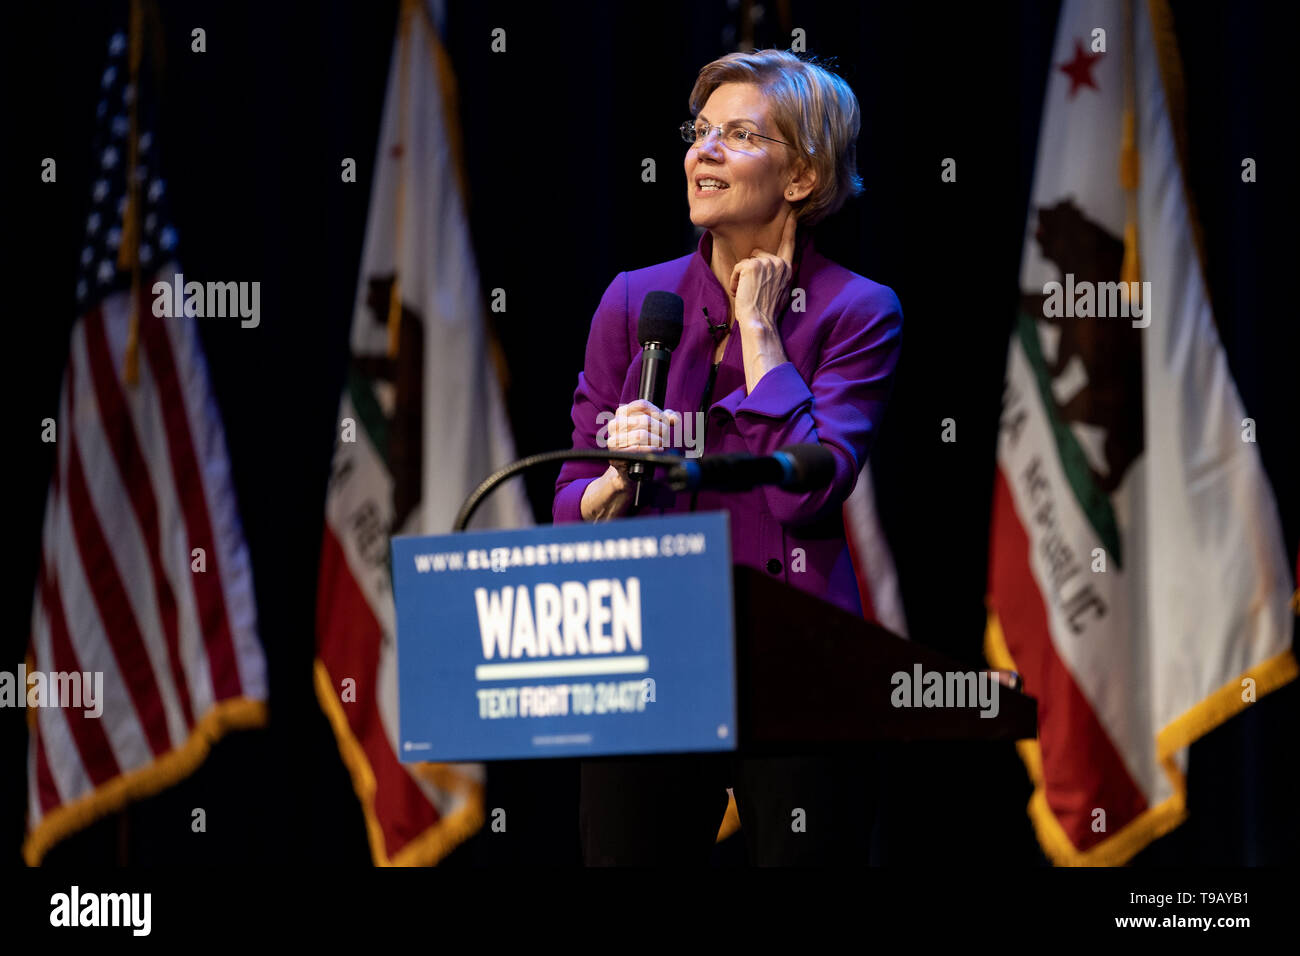 Glendale, CA, USA. 18th Feb, 2019. Presidential candidate, Senator Elizabeth Warren seen holding a microphone during her campaign rally in Glendale, California. Warren is running for the 2020 Democratic nomination for president. Credit: Ronen Tivony/SOPA Images/ZUMA Wire/Alamy Live News Stock Photo